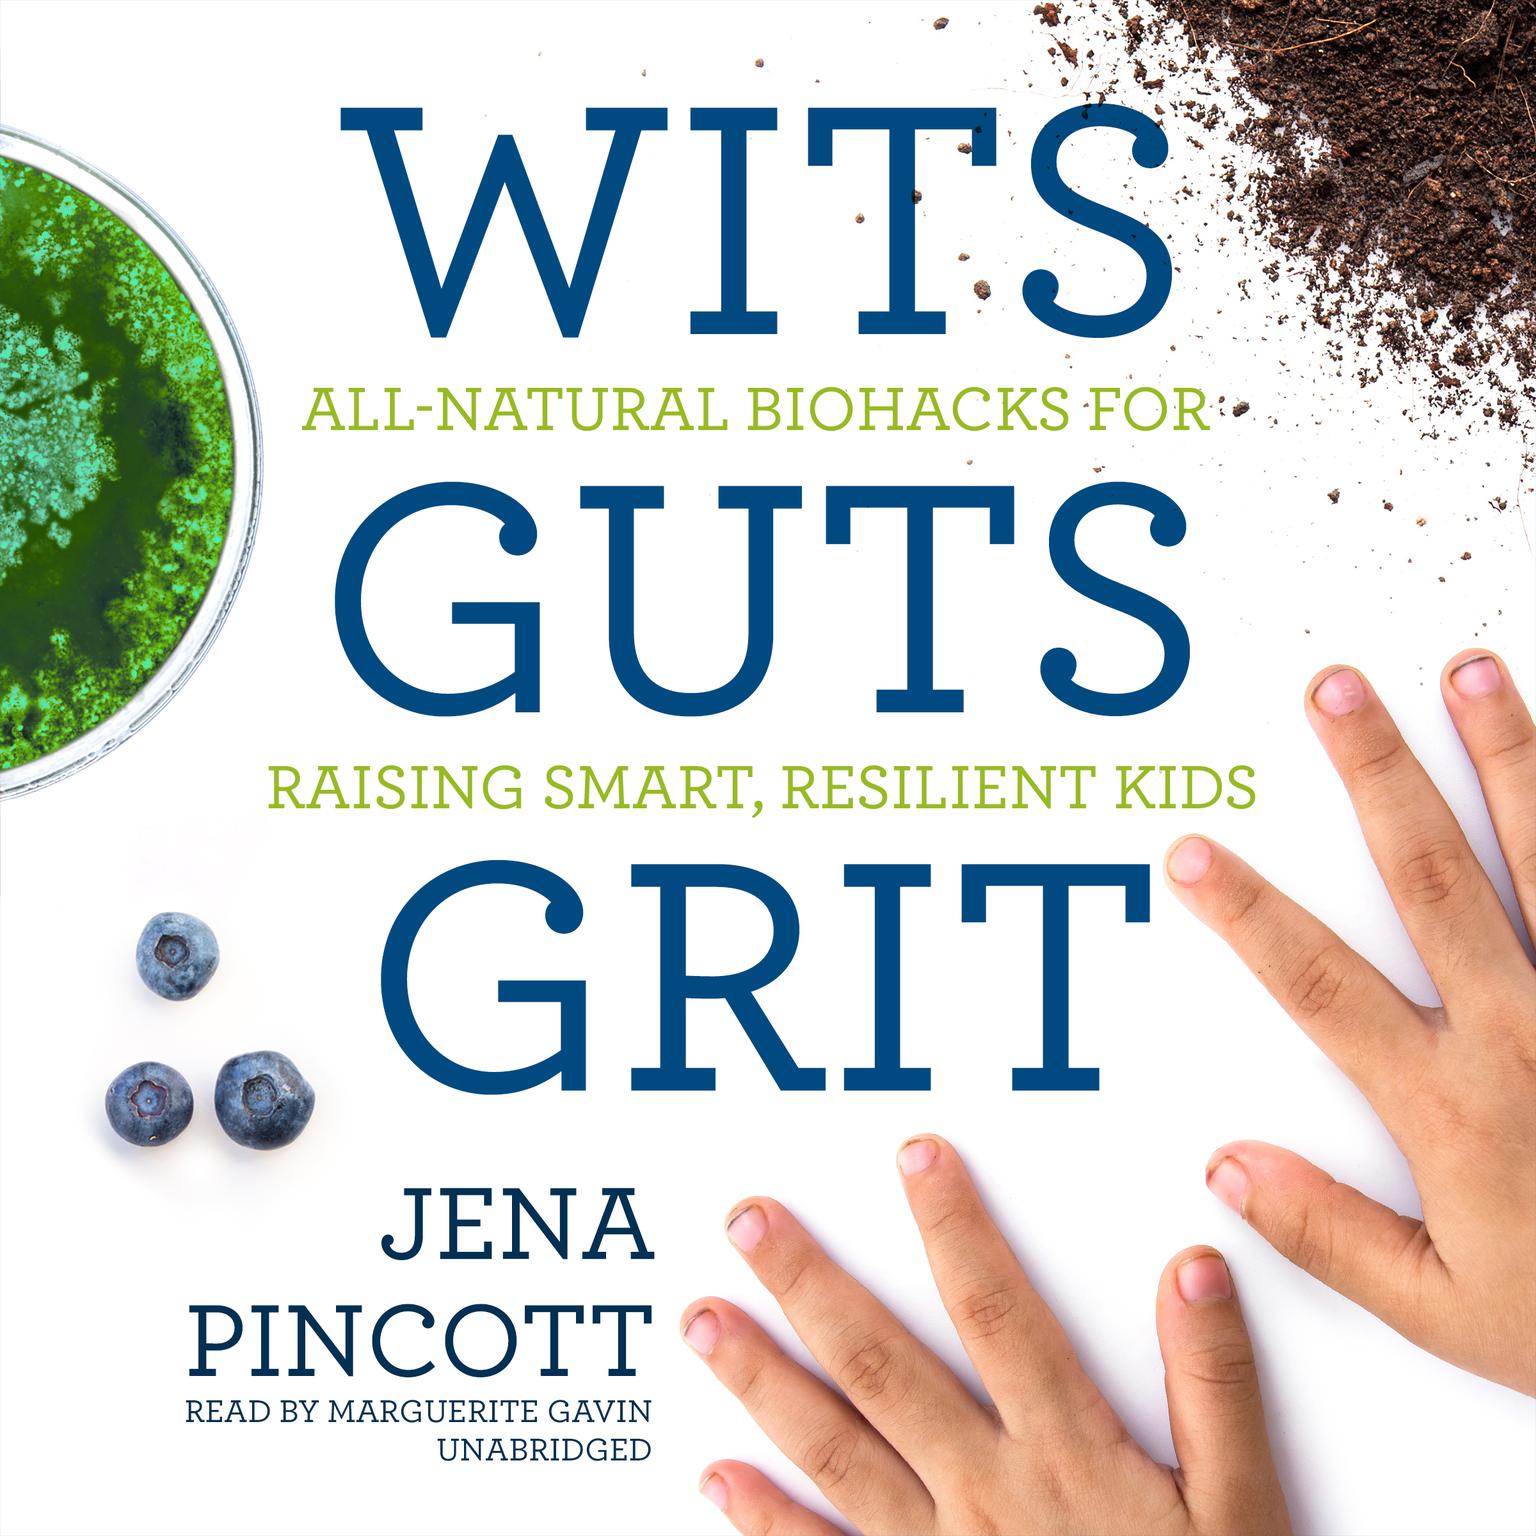 Wits Guts Grit: All-Natural Biohacks for Raising Smart, Resilient Kids  Audiobook, by Jena Pincott